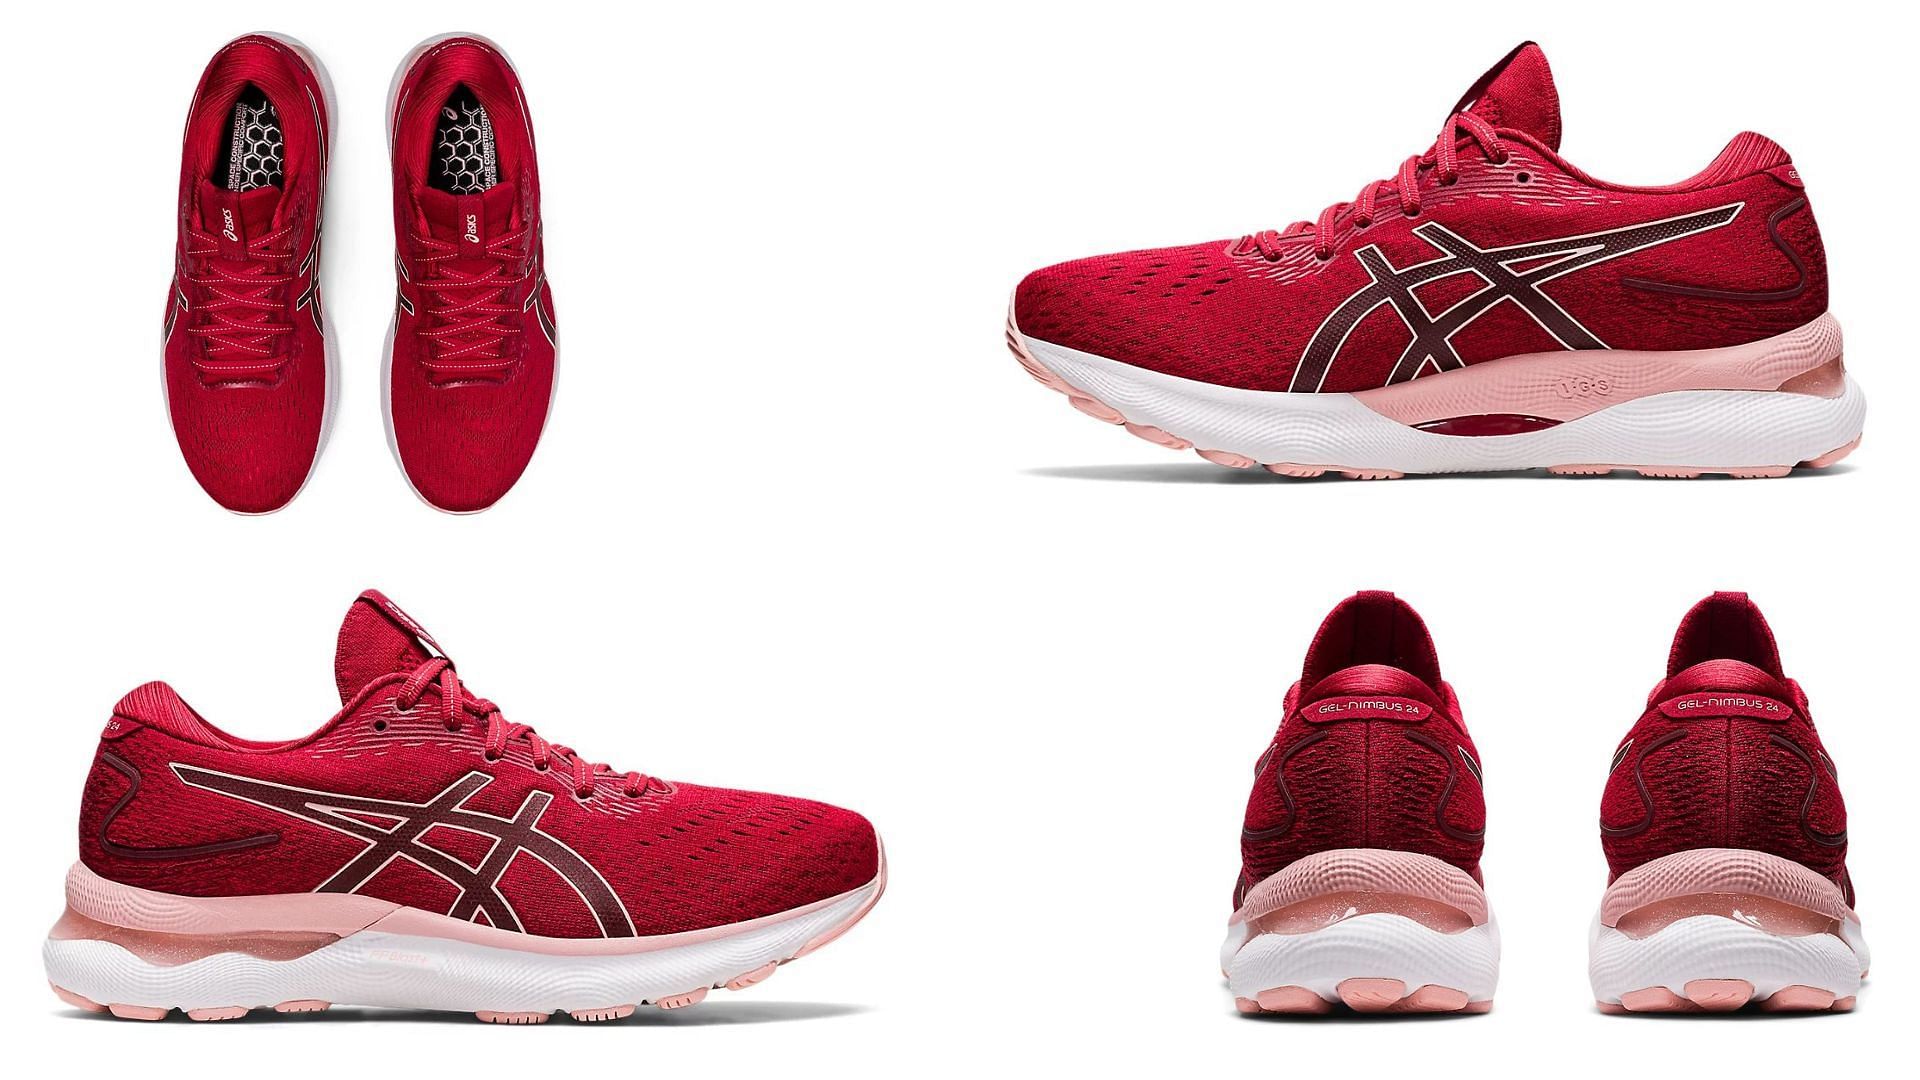 Take a closer look at these running sneakers (Image via ASICS)